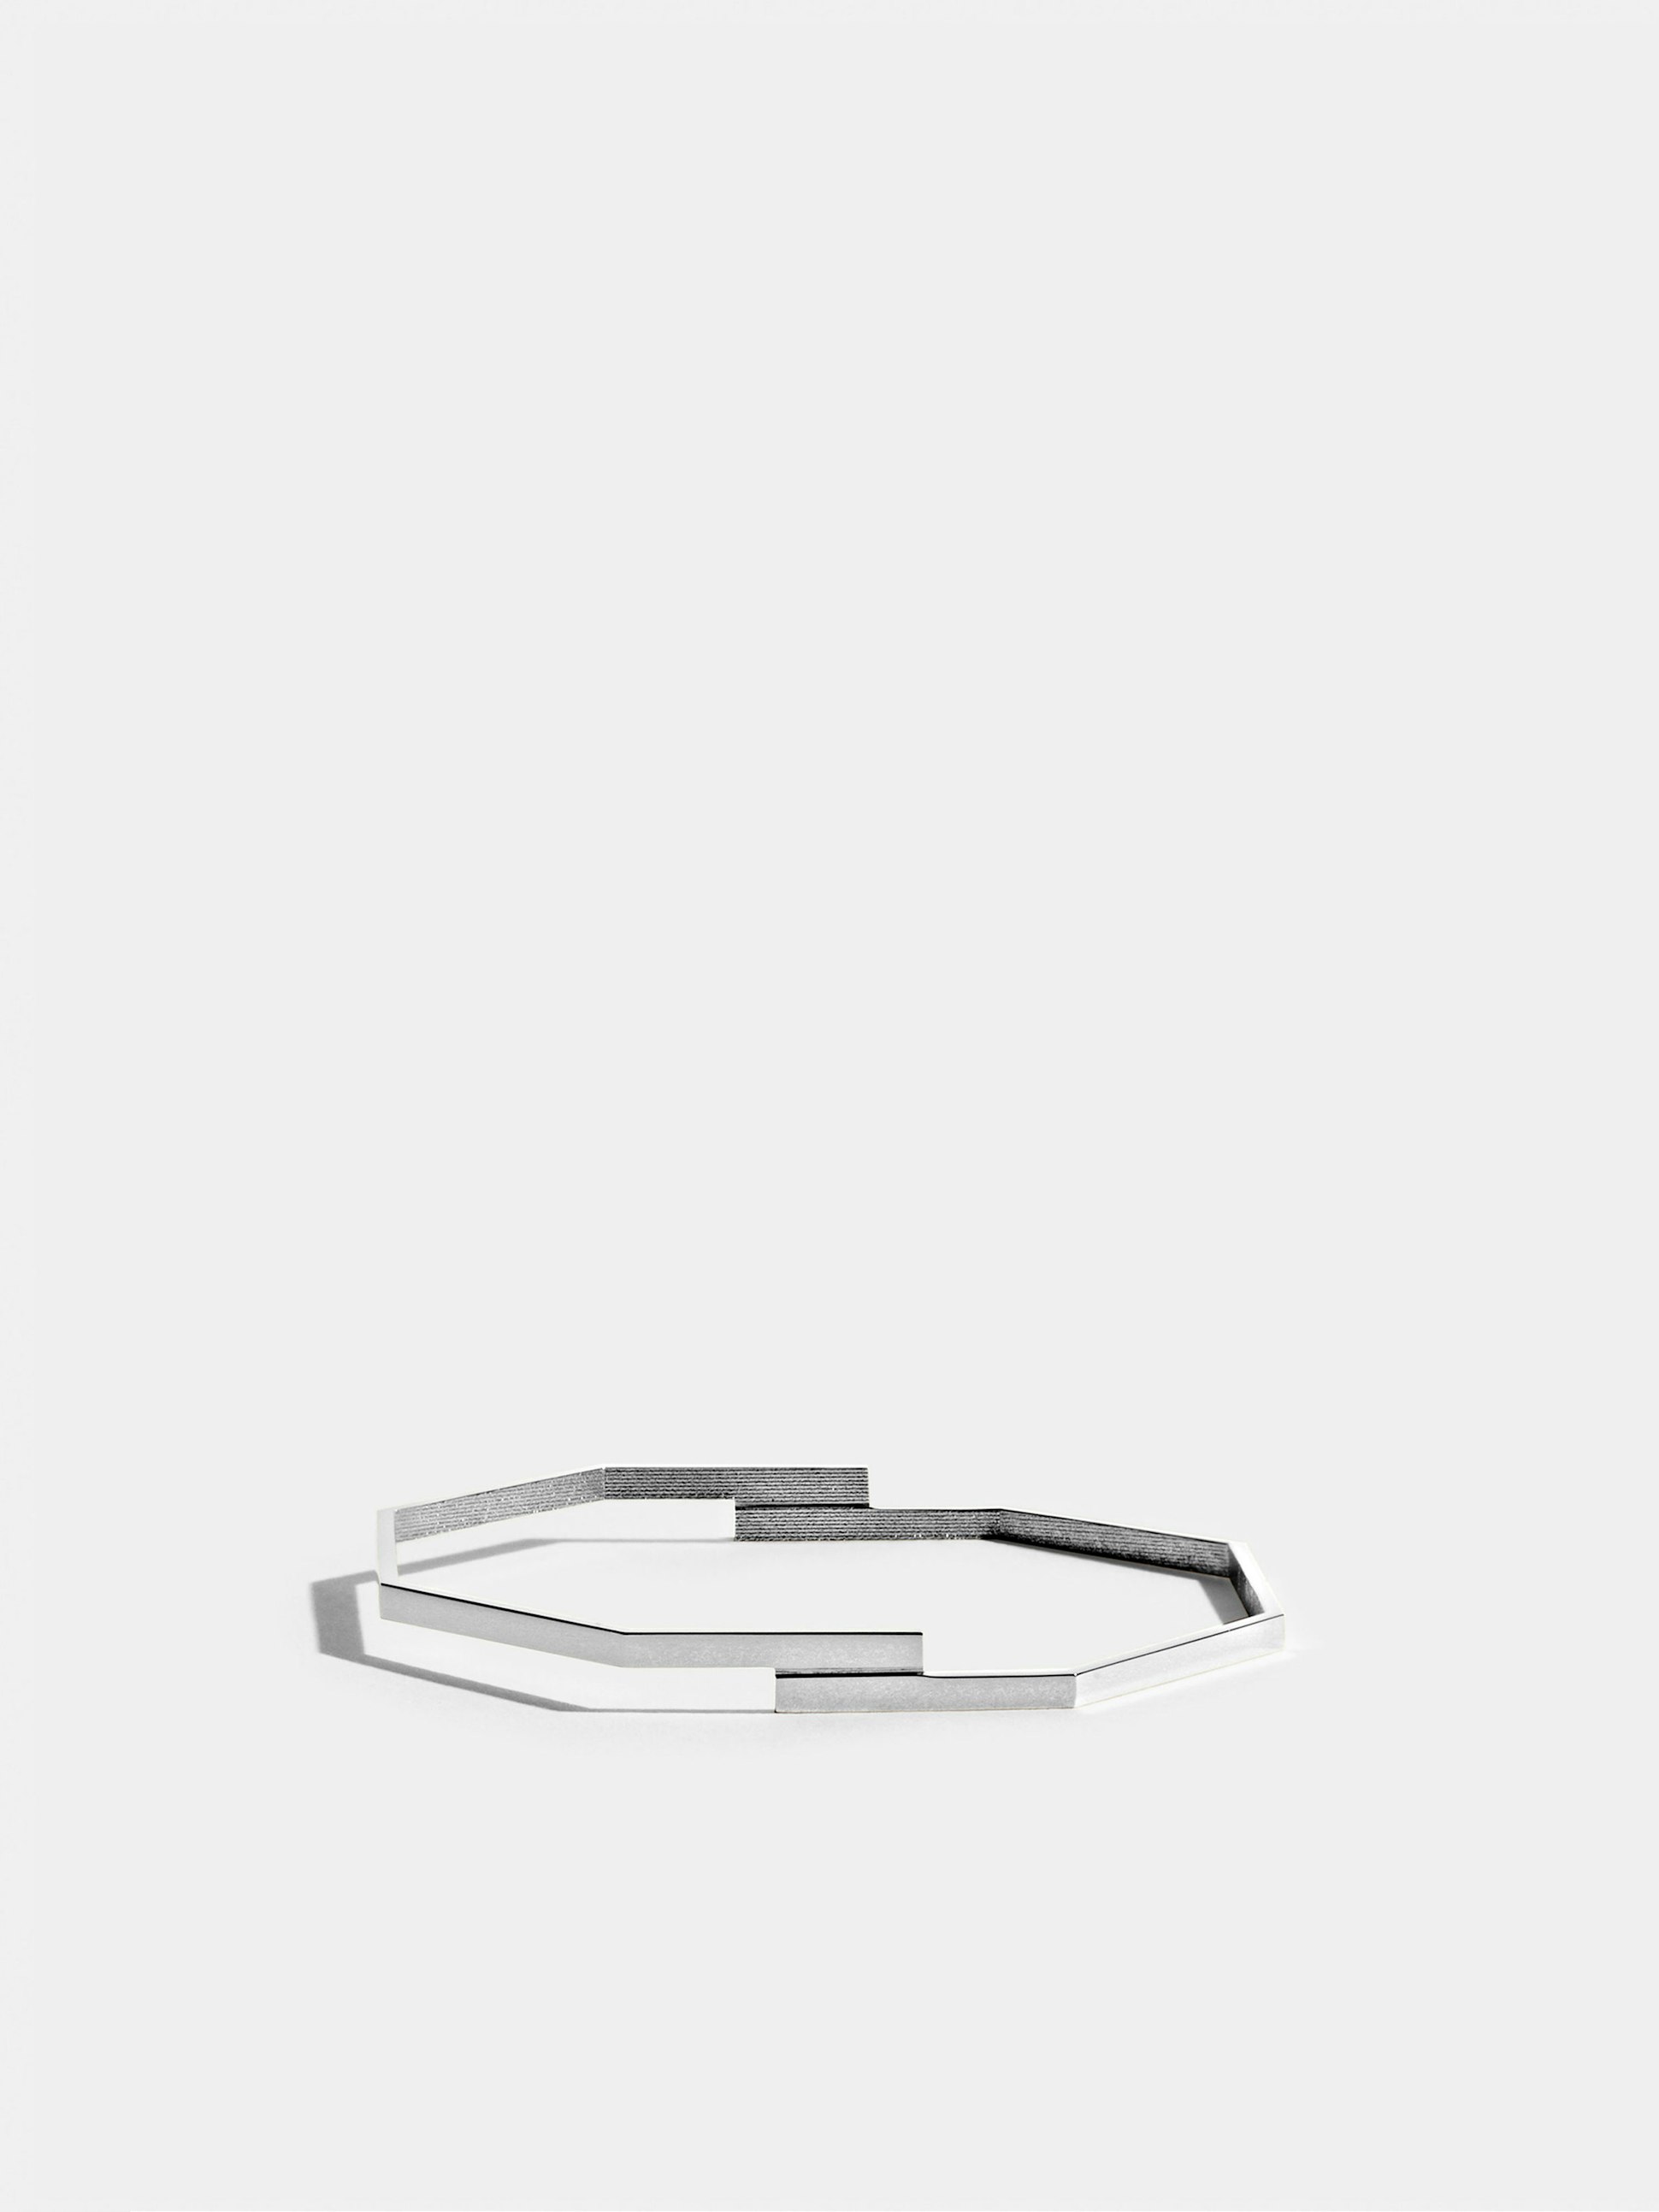 Octogone double bangle in 18k Fairmined ethical white gold